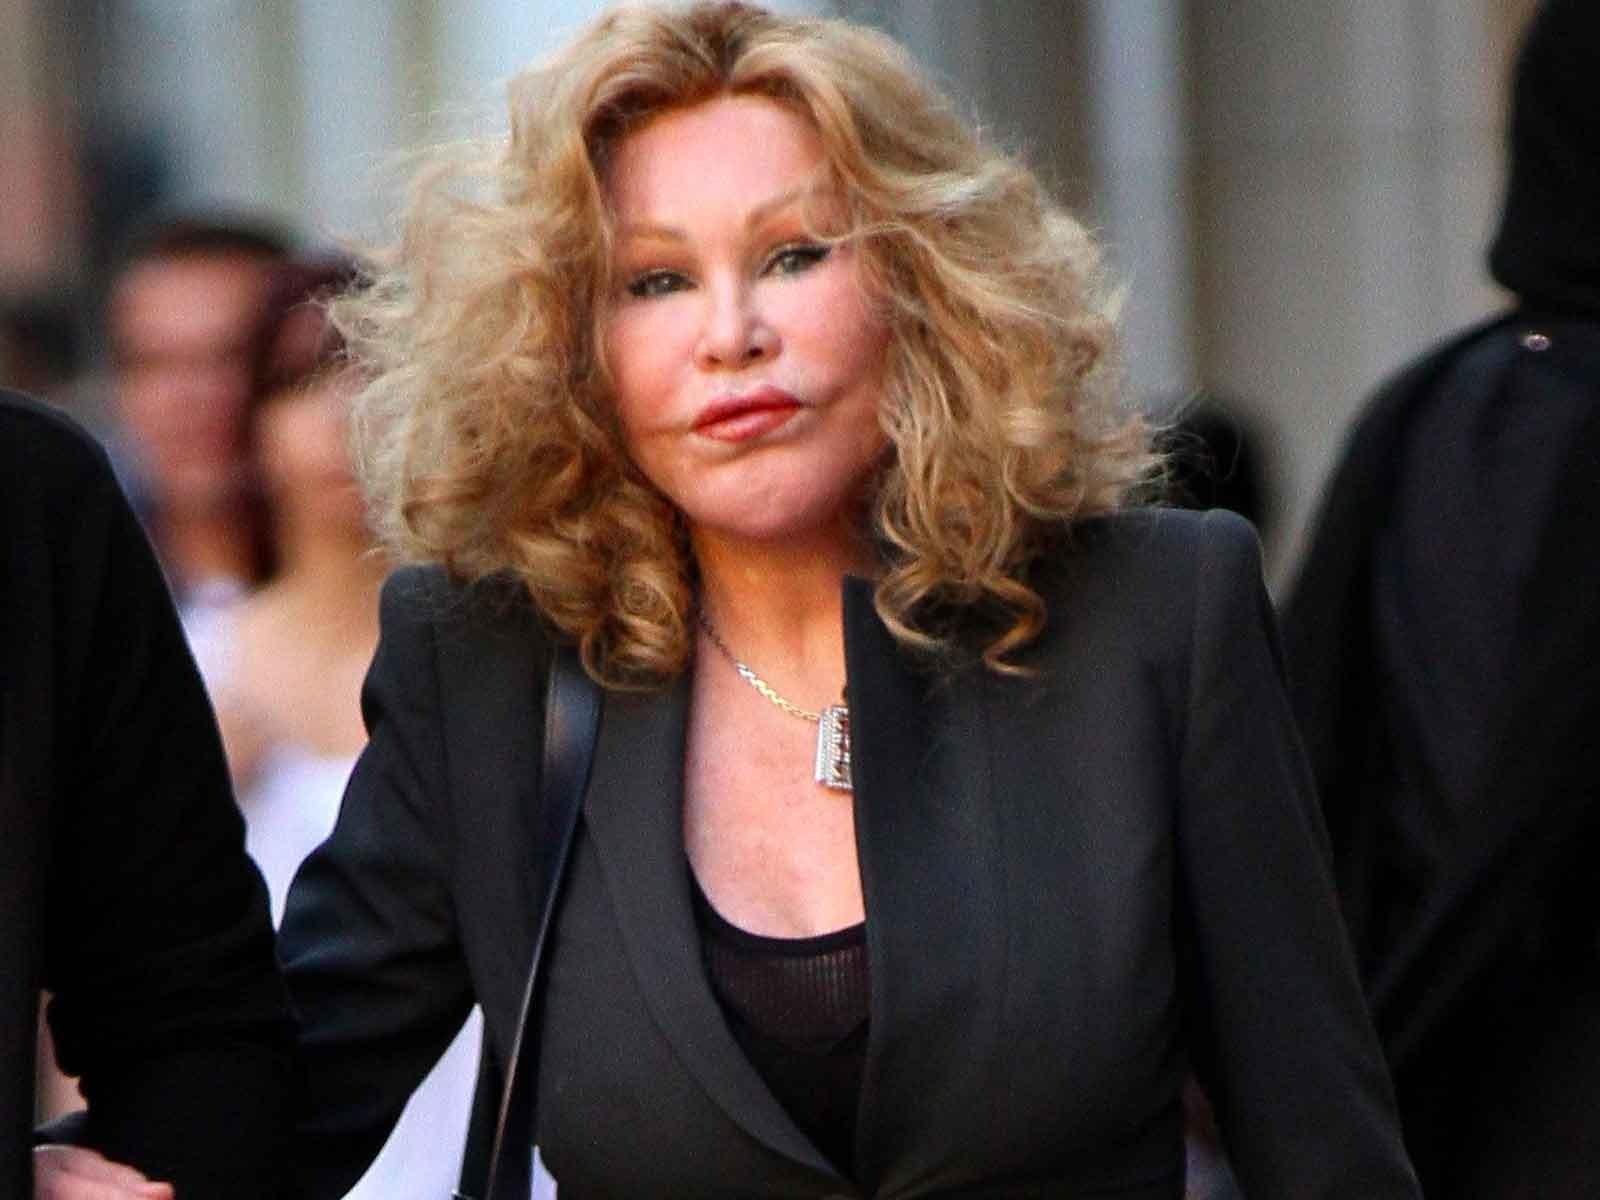 ‘Catwoman’ Jocelyn Wildenstein Accused of Losing $250,000 in Jewelry